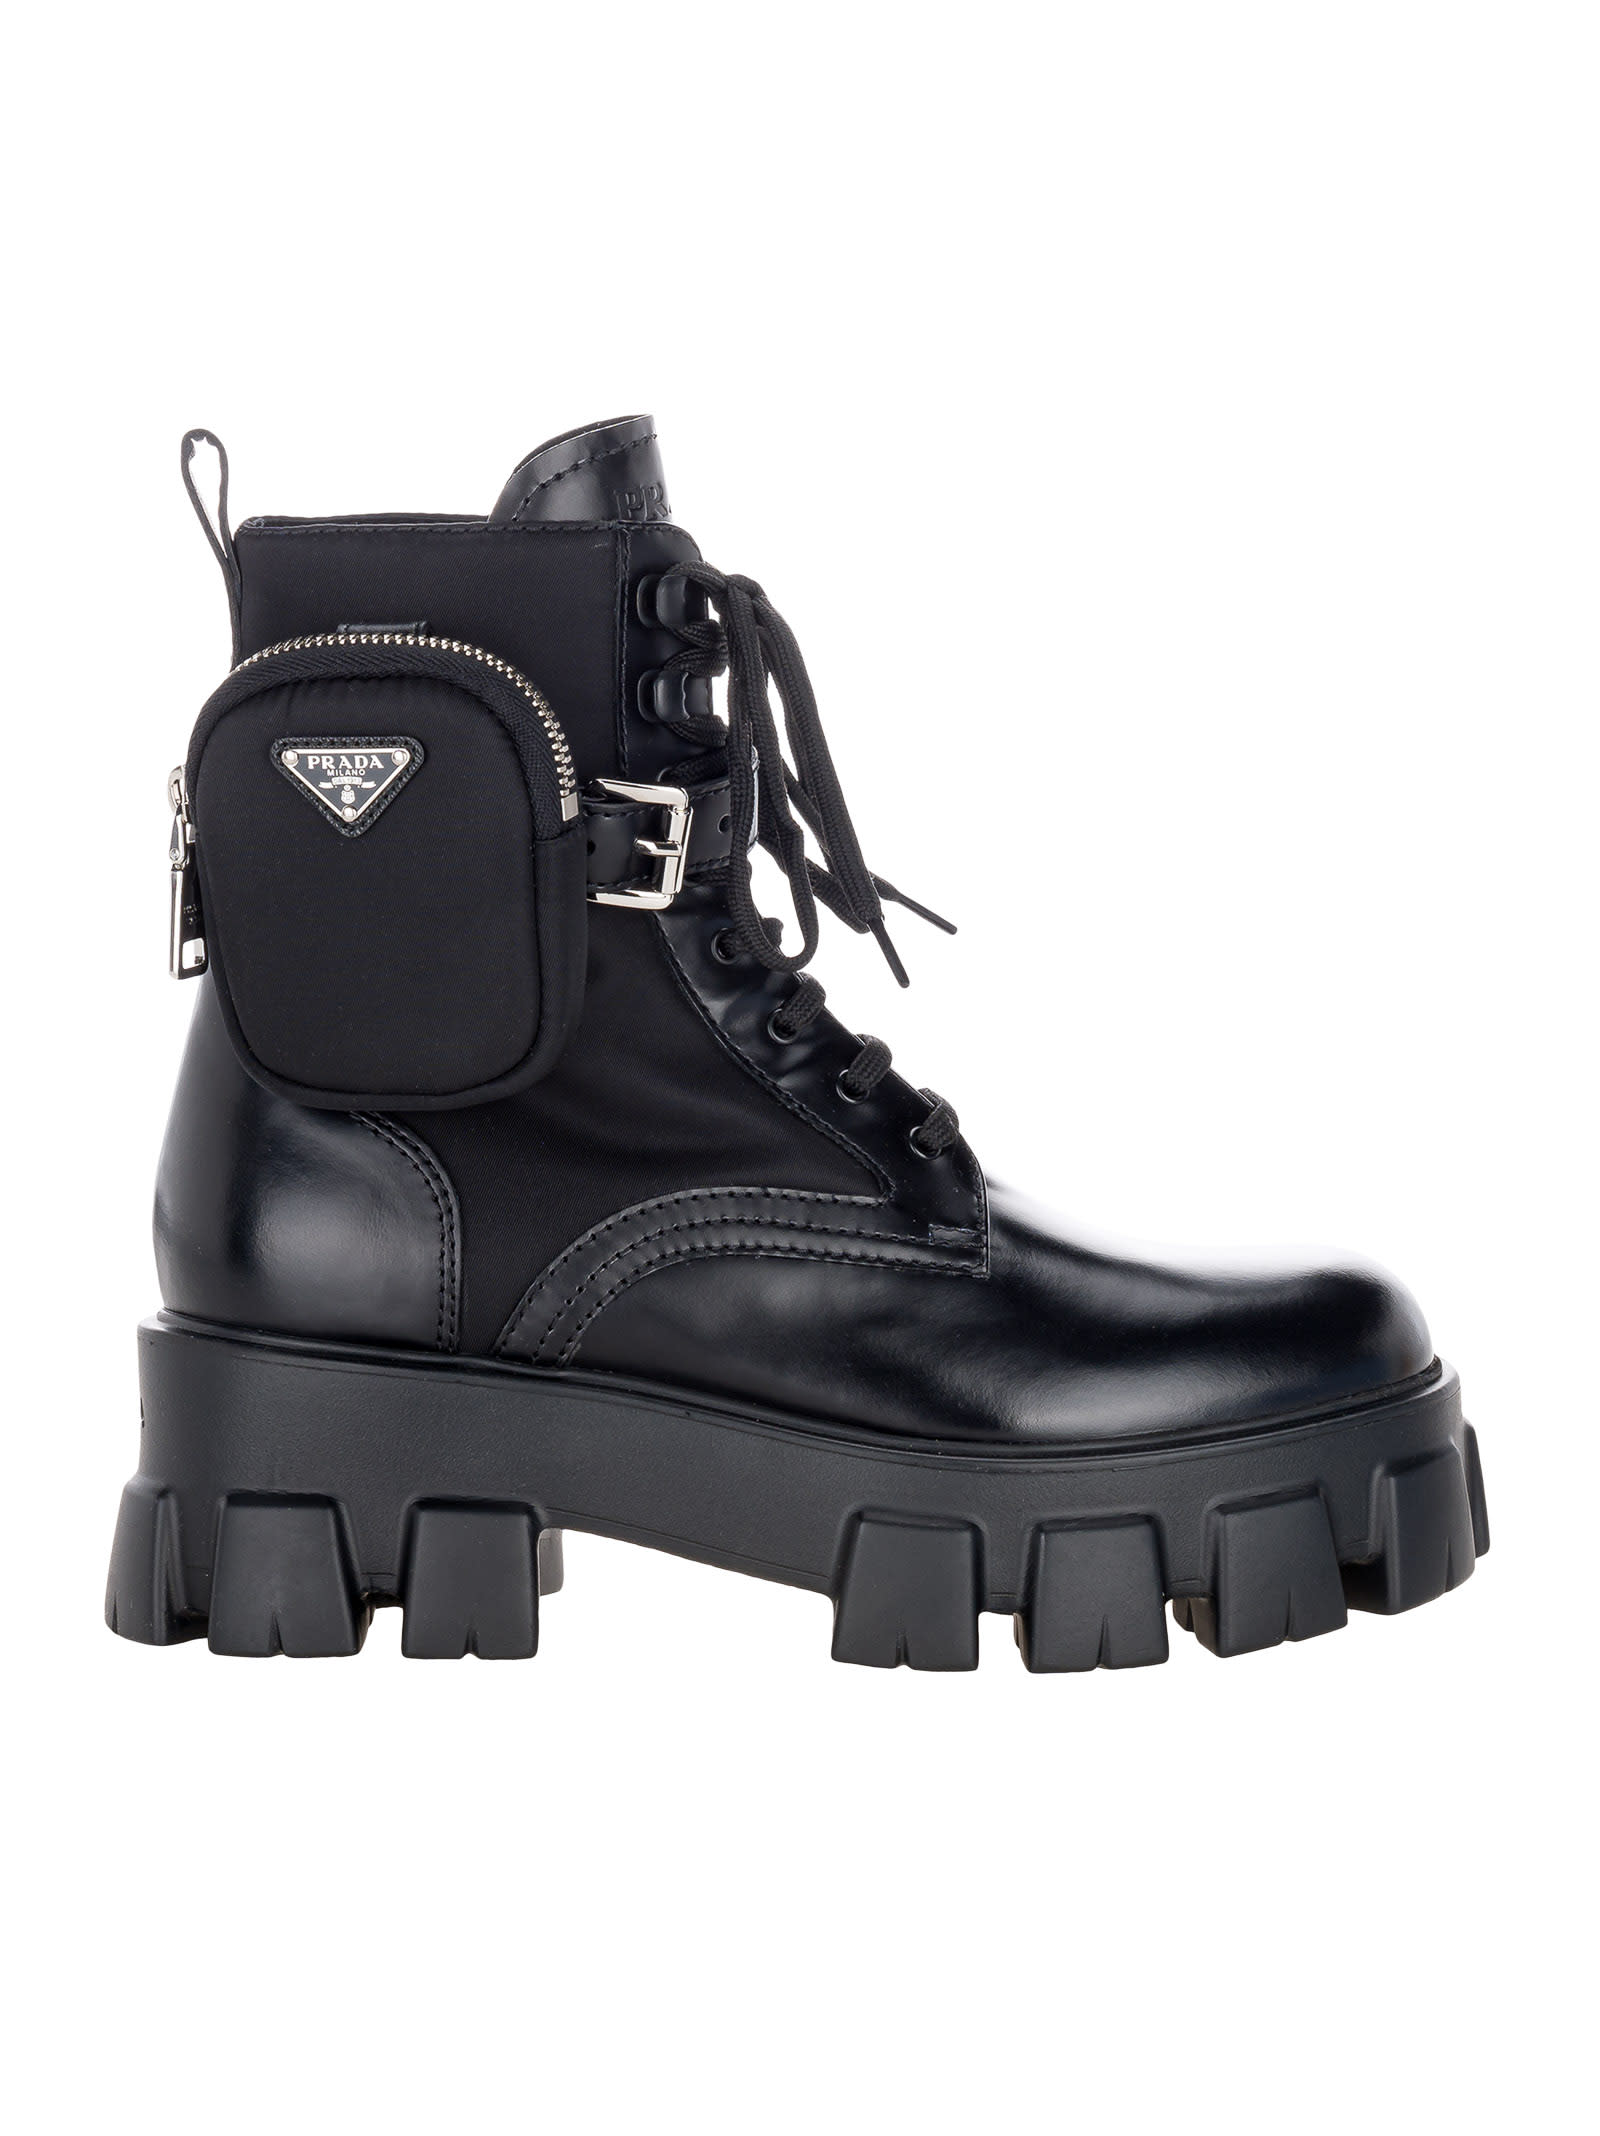 Buy Prada Brushed Rois Leather And Nylon Monolith Boots online, shop Prada shoes with free shipping